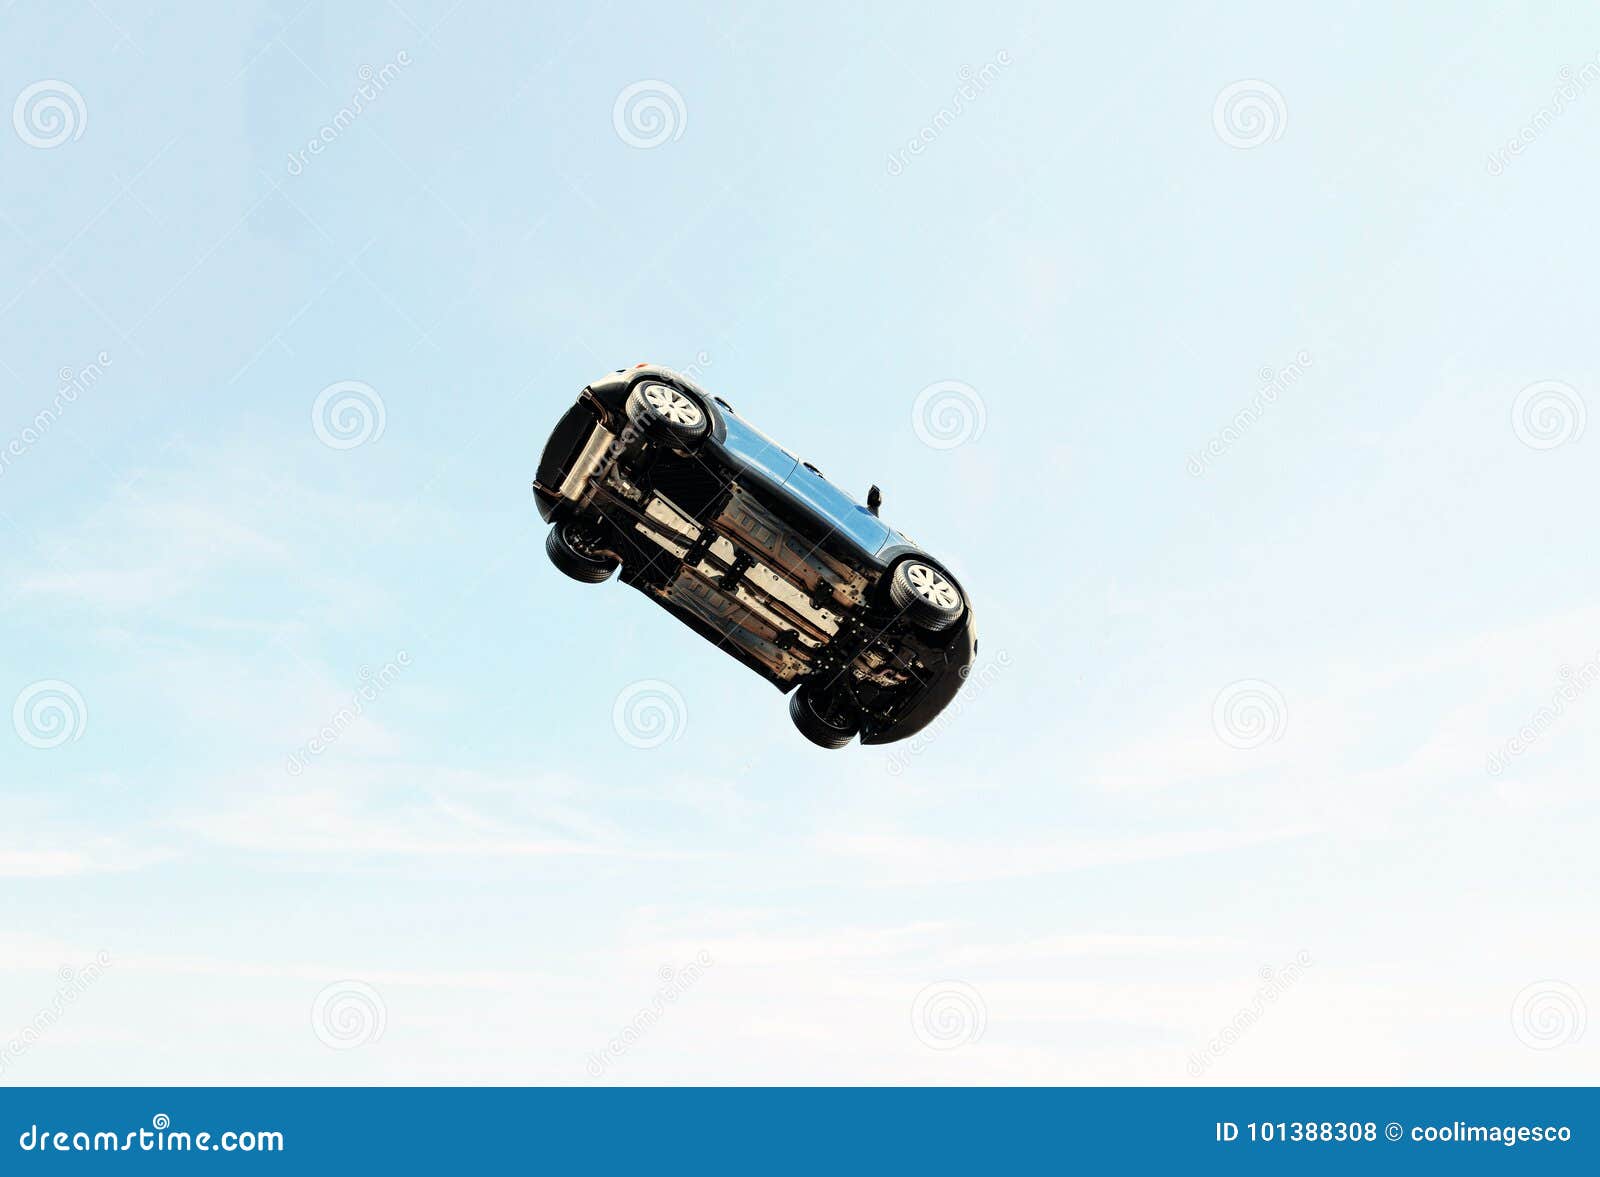 Flying Car On Its Side In Midair Stock Photo Image Of Auto Drink 101388308